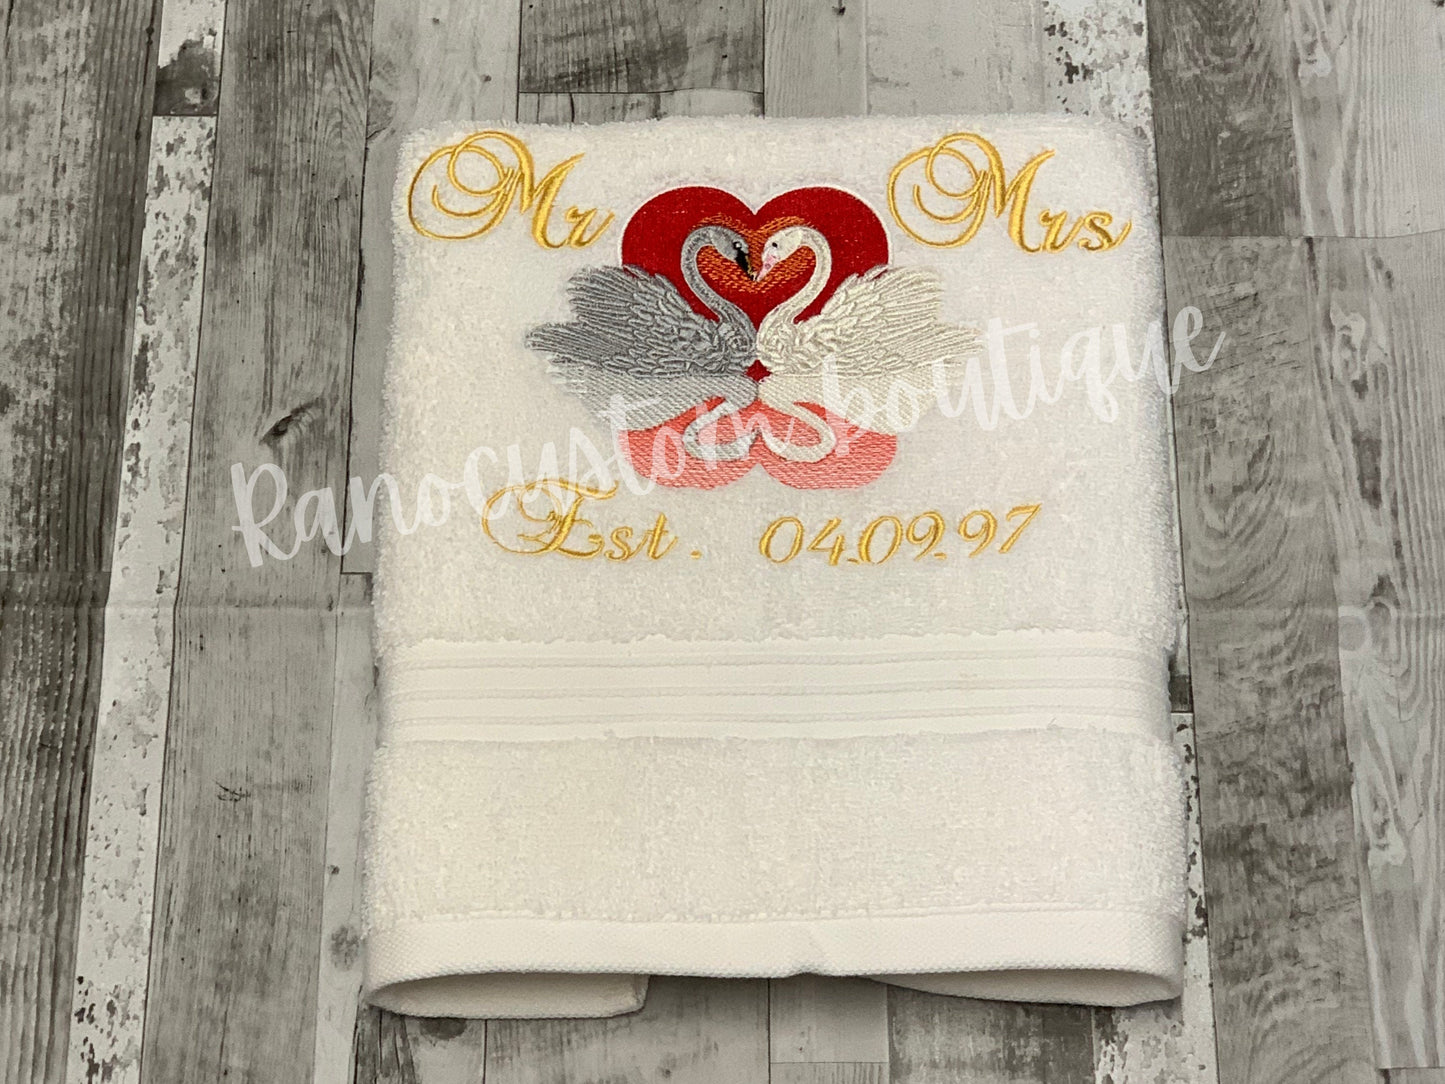 Embroidered Swan Design Towel, Embroidered Luxury Anniversary Towel, Luxury Anniversary Gift, Wedding Gift